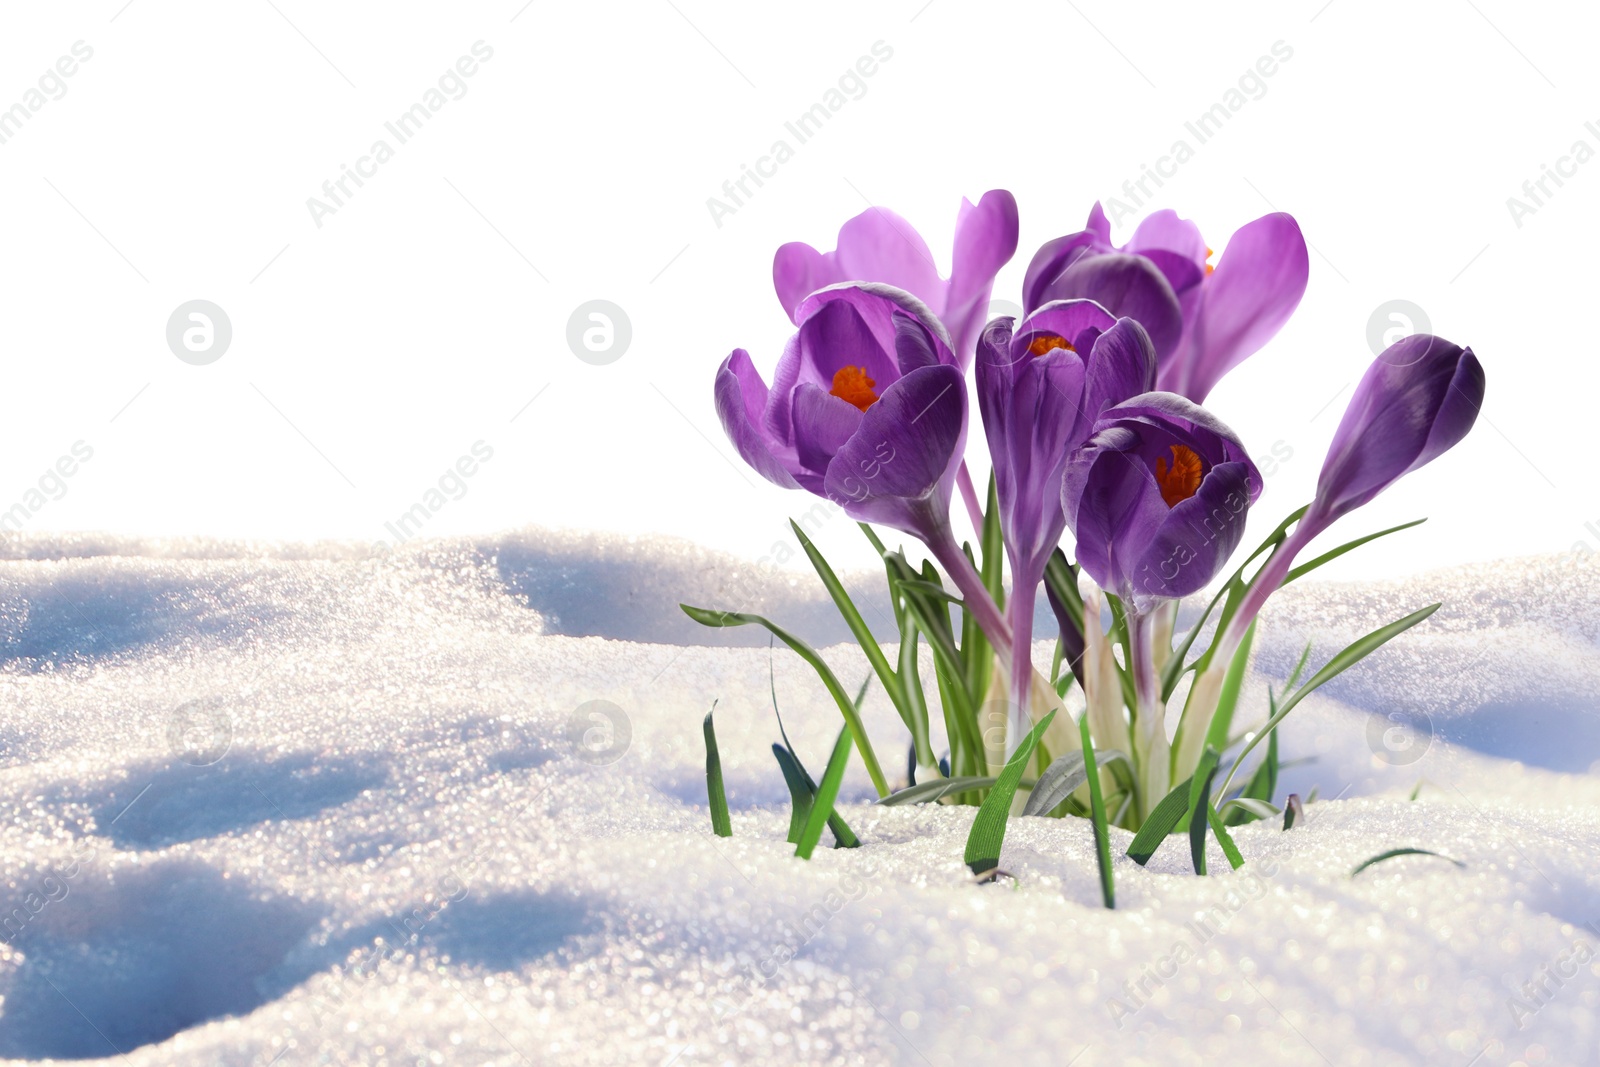 Image of Beautiful spring crocus flowers growing through snow, space for text